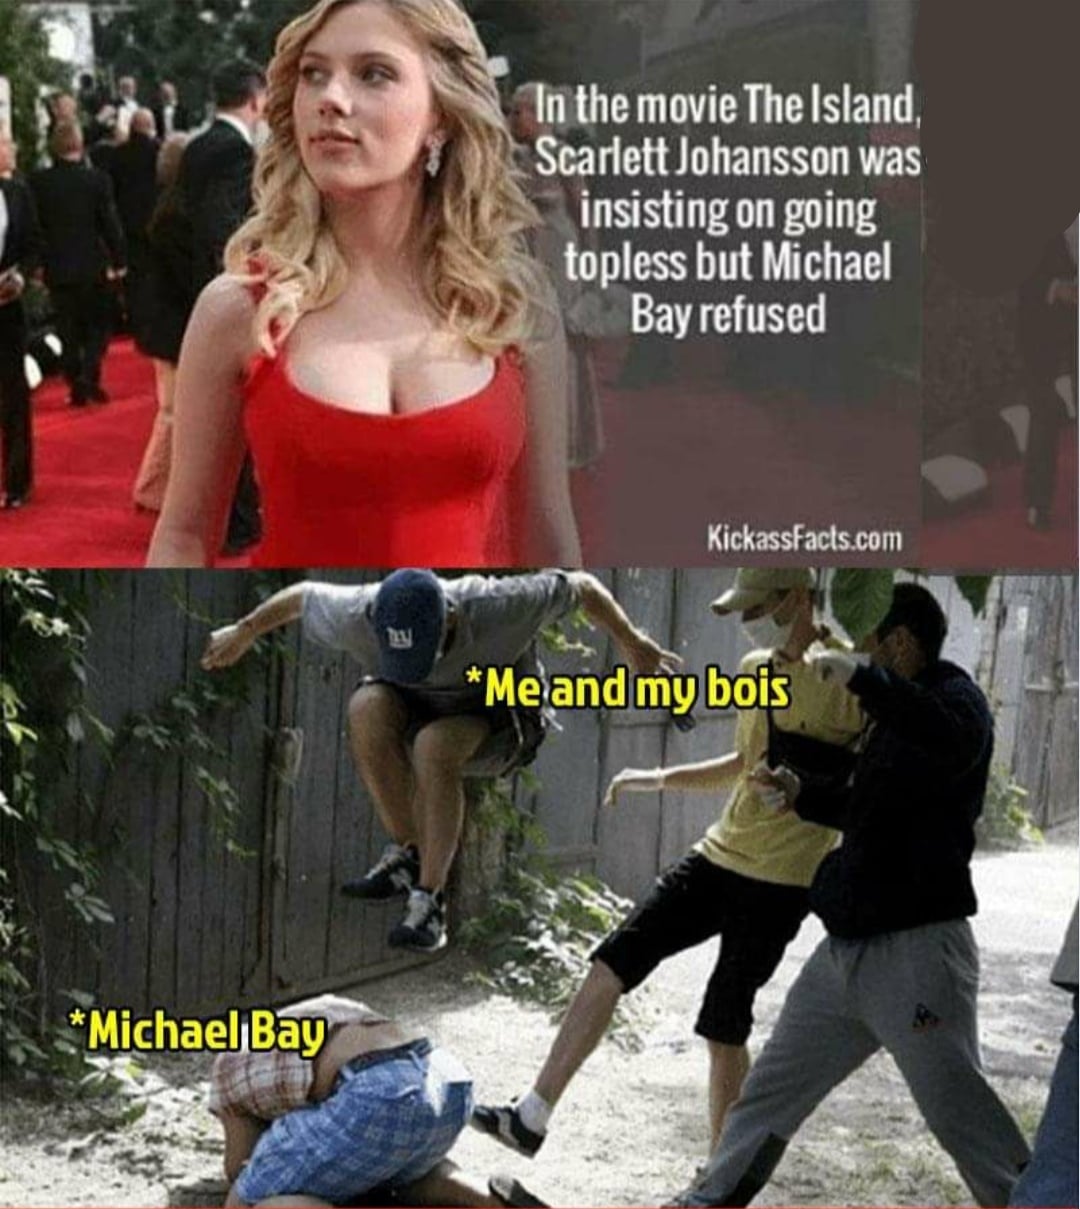 Funny, Michael Bay, Bay, Skin, Michael, WgXcQ other memes Funny, Michael Bay, Bay, Skin, Michael, WgXcQ text: 'In the movie The Island, ScarlettJohansson was insisting on going topless but Michael Bay refused Kickassfacts.com bois 